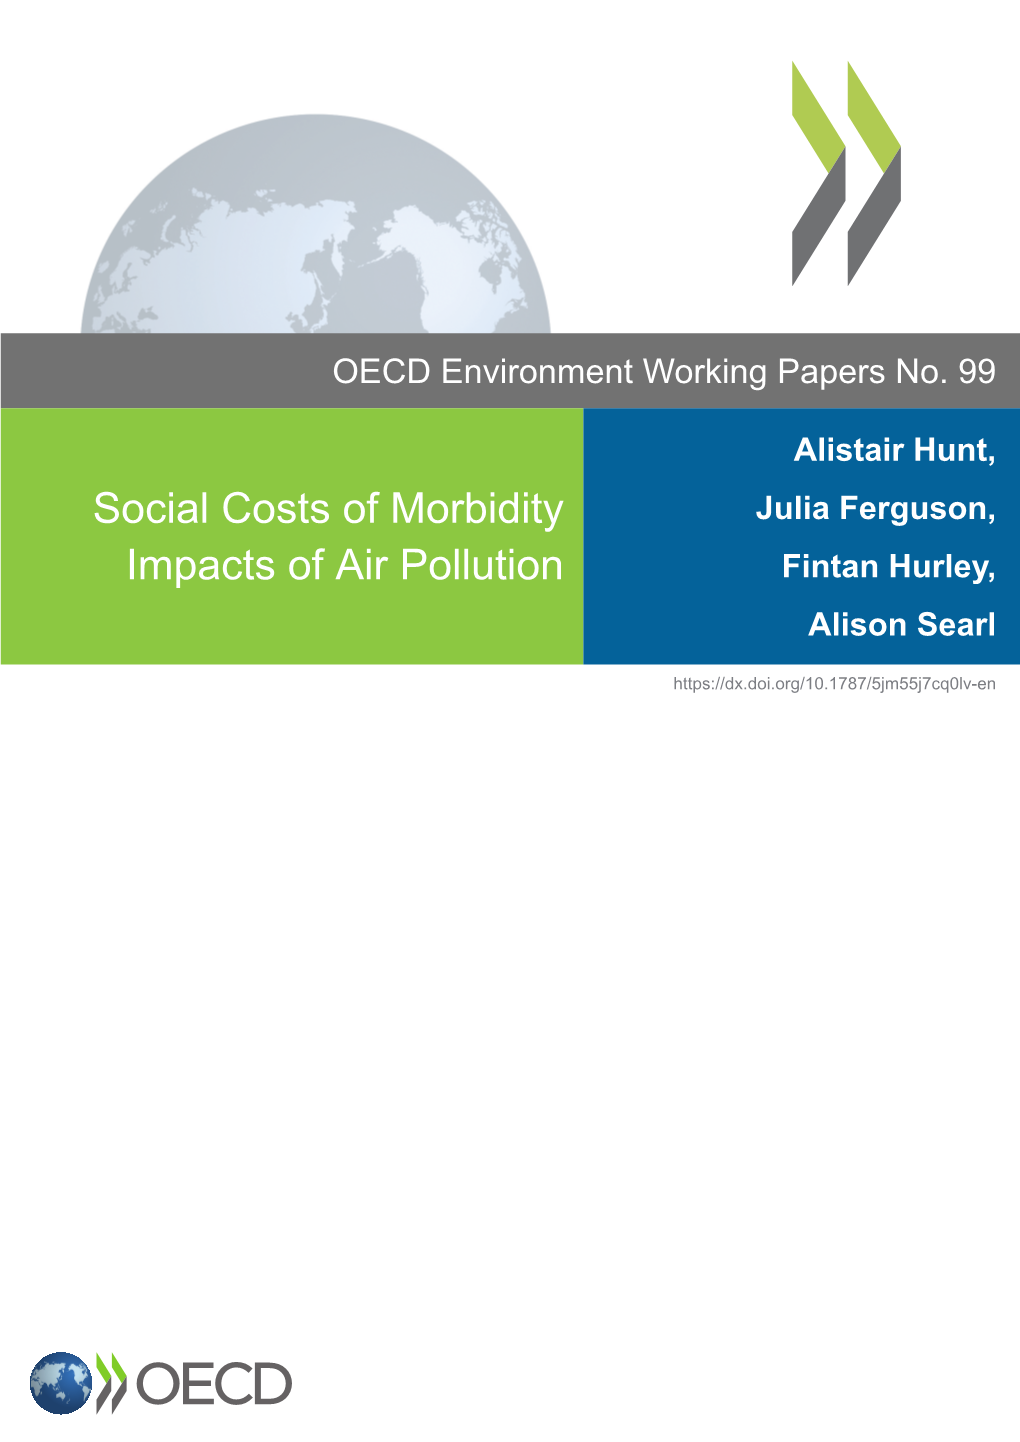 SOCIAL COSTS of MORBIDITY IMPACTS of AIR POLLUTION - ENVIRONMENT WORKING PAPER No